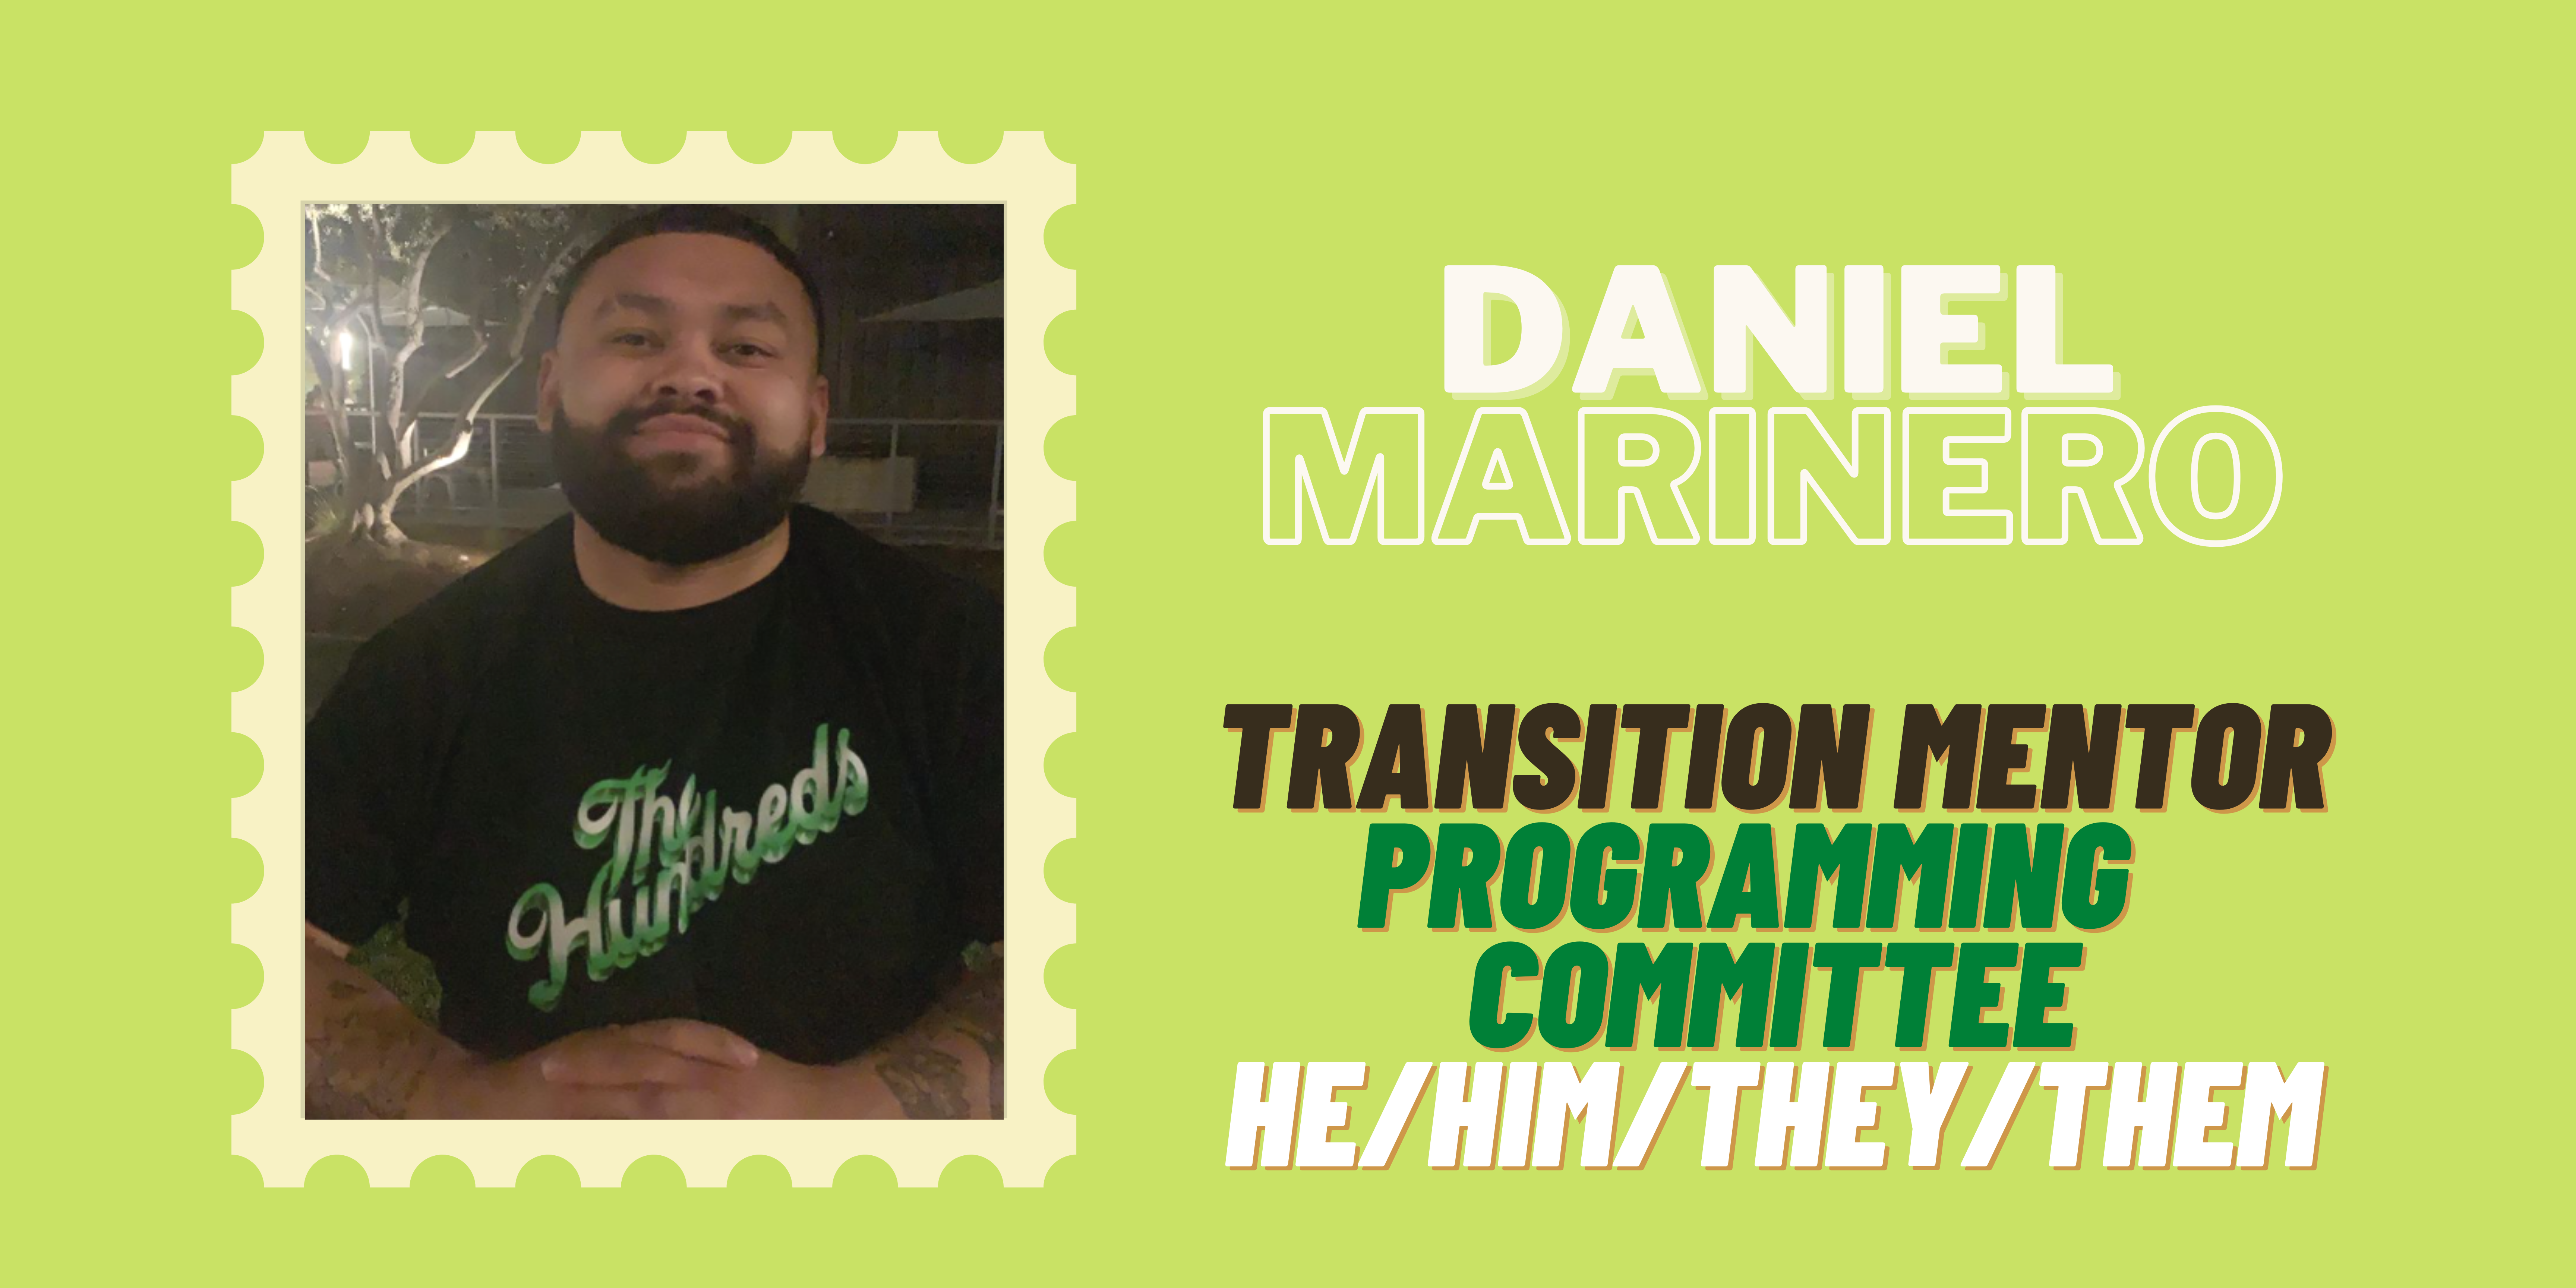 Transition Mentor: Daniel Marinero, pronouns he/him/they/them, Programming Committee